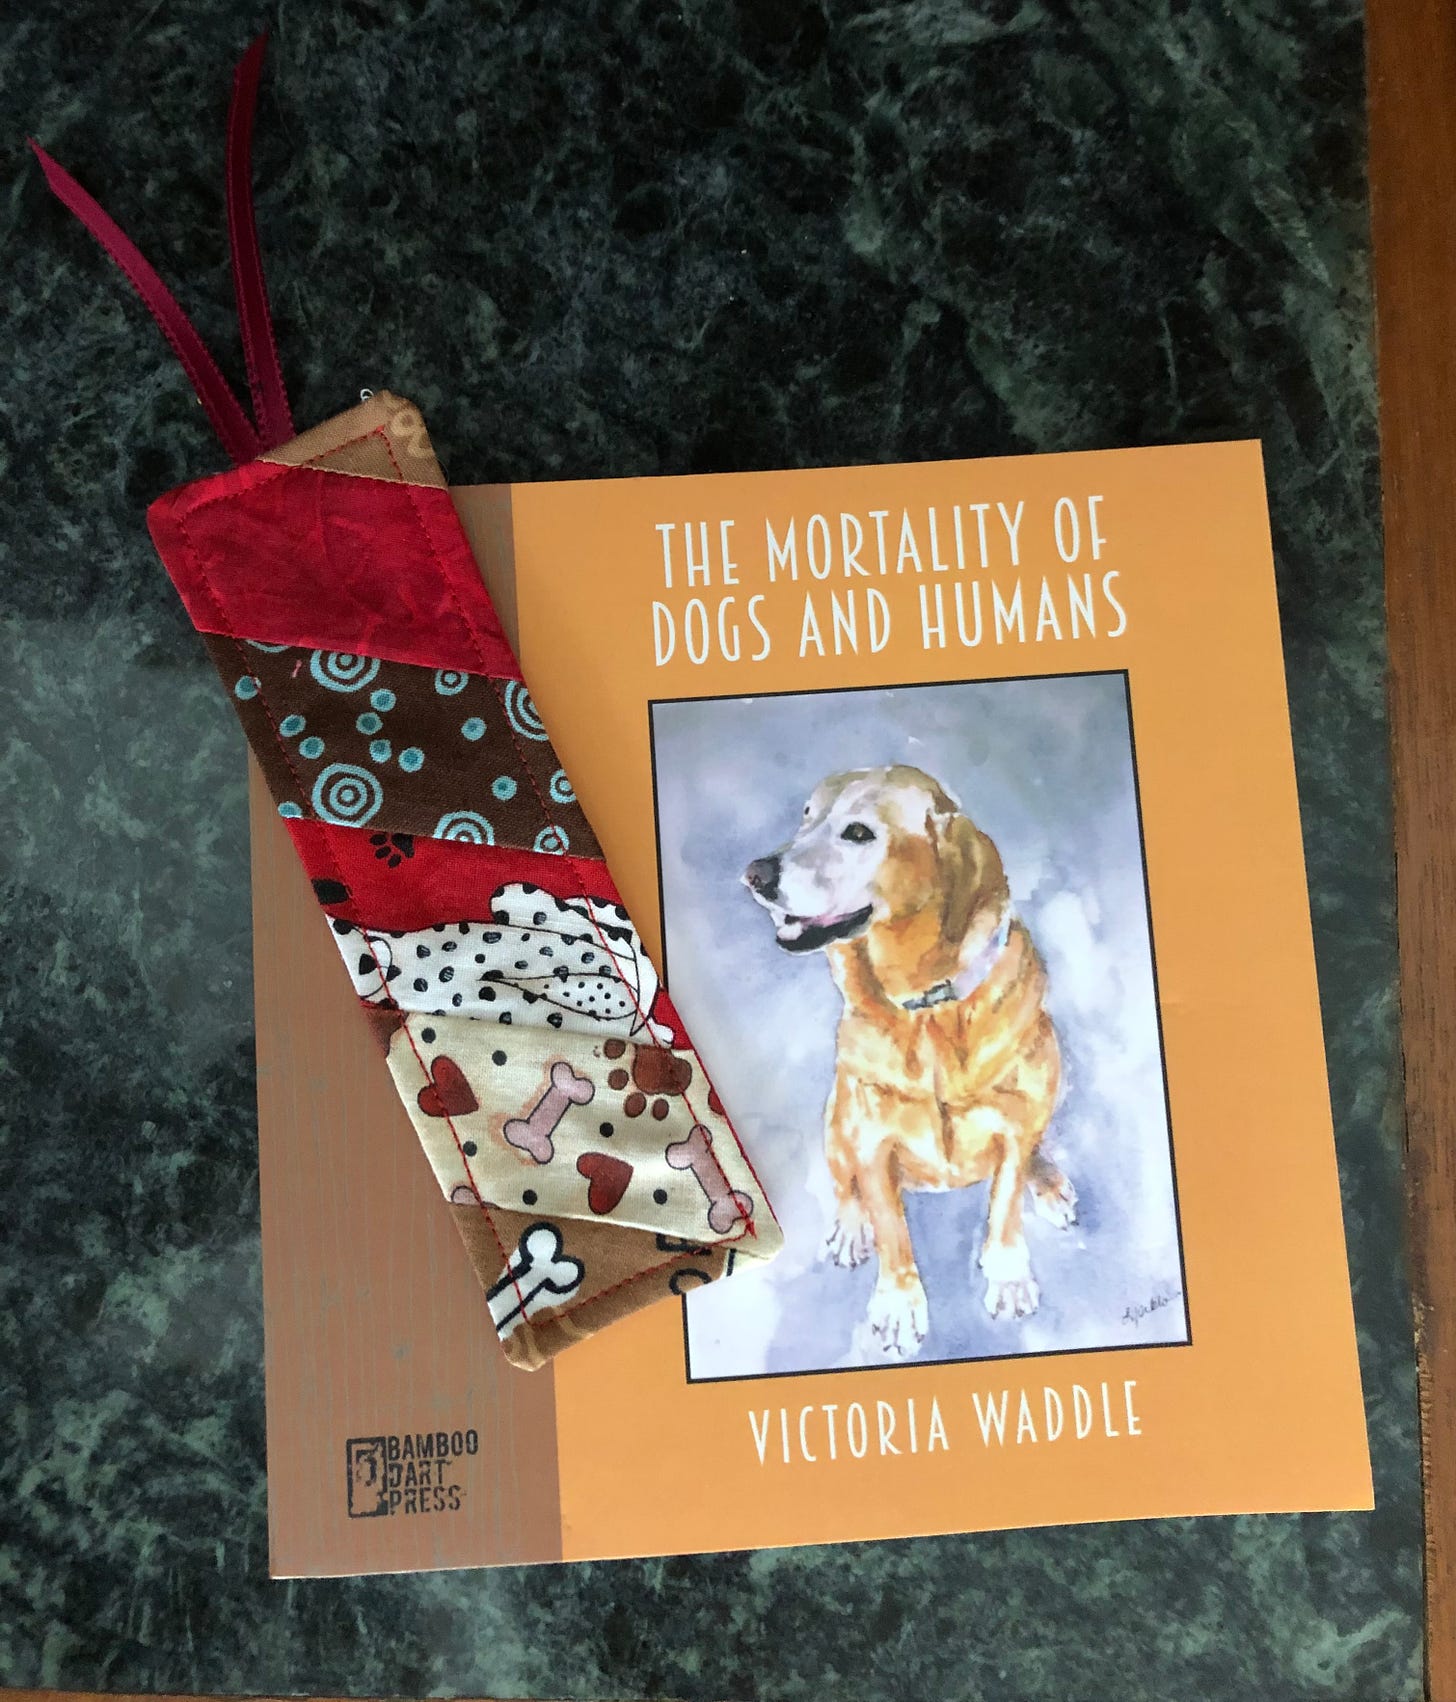 The chapbook ook The Mortality of Dogs and Humans, which has a watercolor painting of a Labrador retriever on teh cover, along with a fabric bookmark.